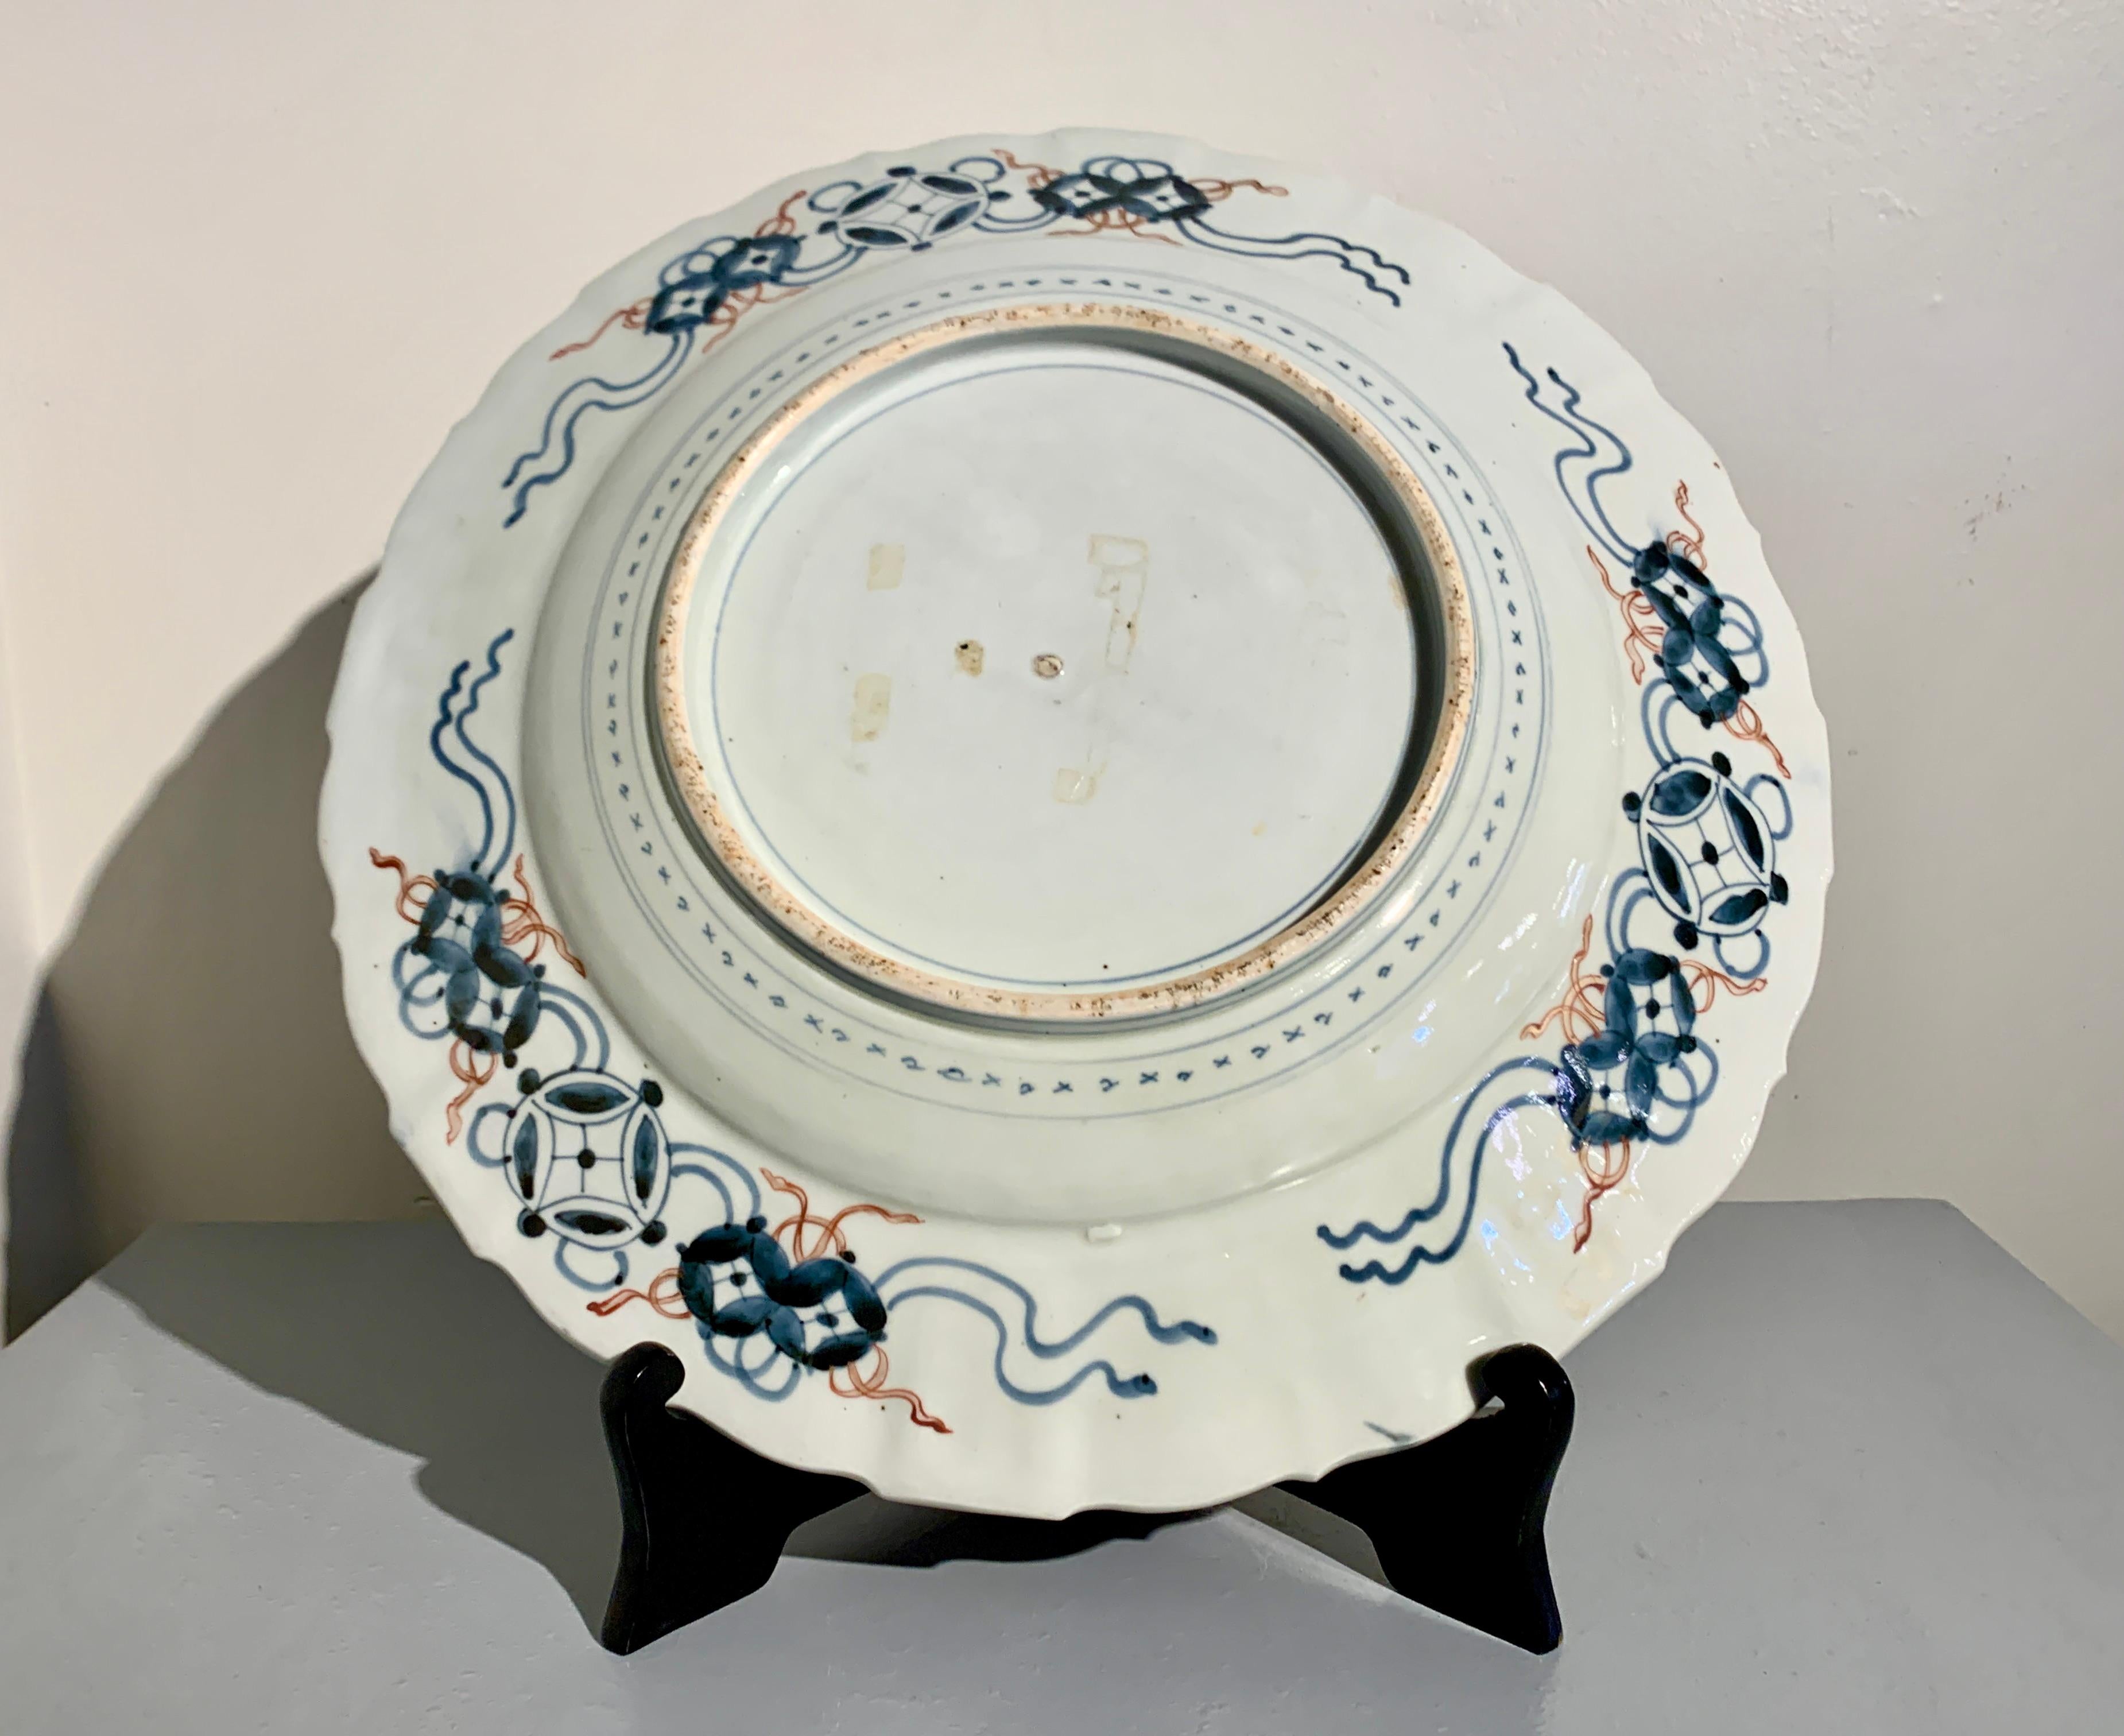 Large Japanese Imari Porcelain Charger with Koi, Meiji Period, late 19th century In Fair Condition For Sale In Austin, TX